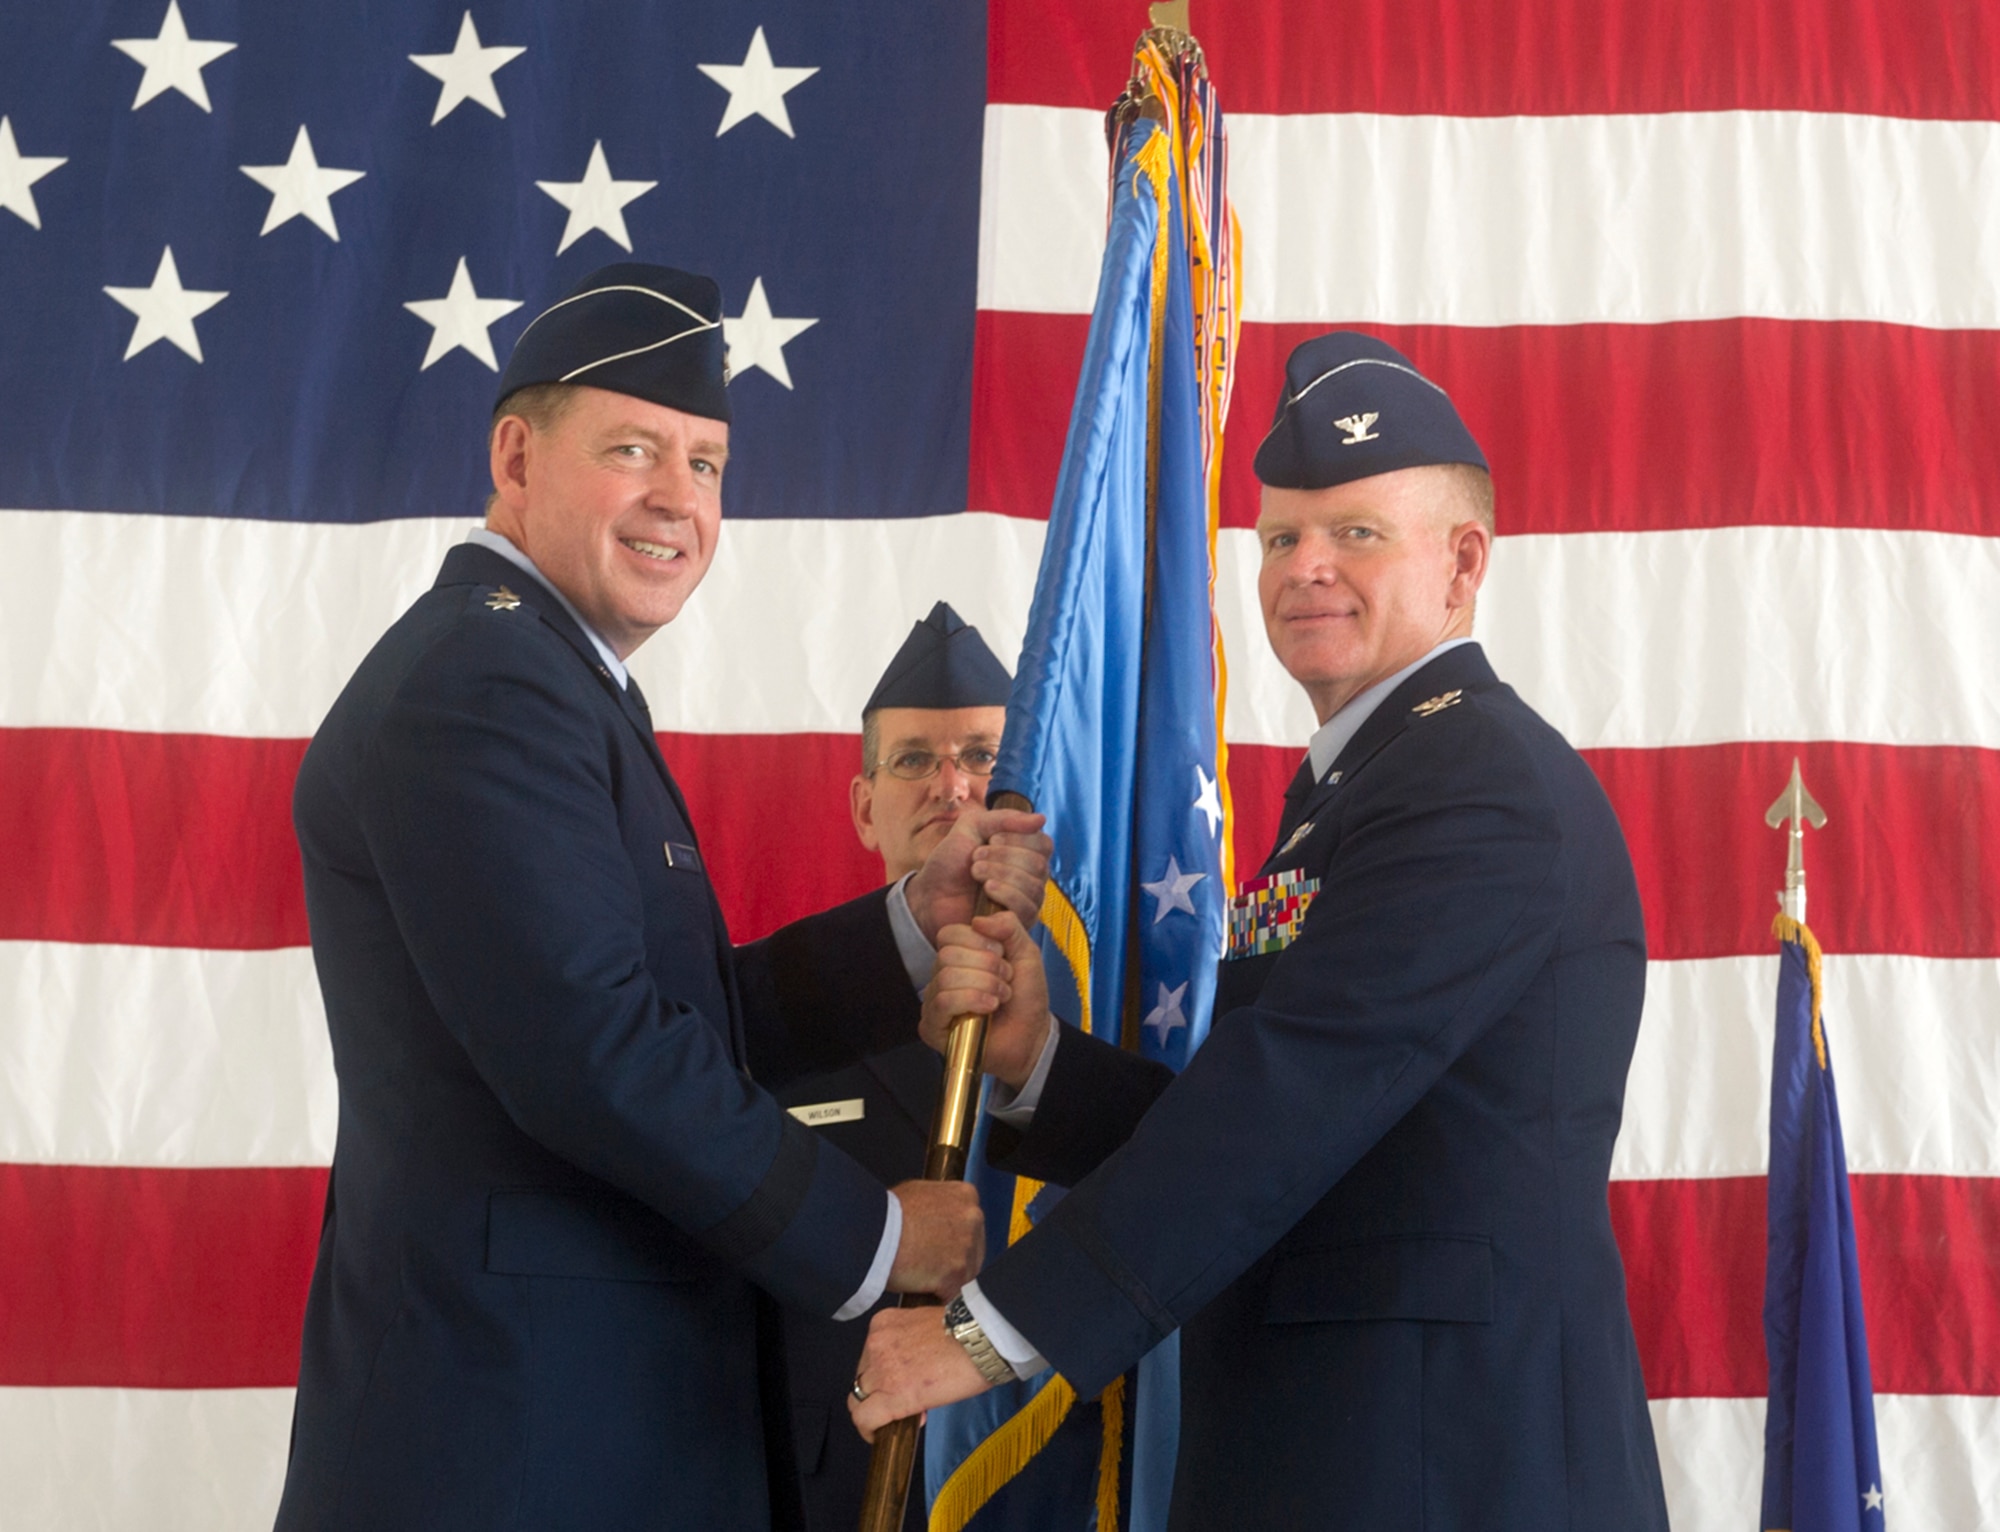 Col. Darrell Judy, right, accepts the guidon and command, of the 71st Flying Training Wing from Maj. Gen. James Hecker, the 19th Air Force commander, during a change-of-command ceremony June 28 at Vance Air Force Base, Oklahoma. Judy replaced Col. Clark Quinn. (U.S. Air Force photo/ Terry Wasson)